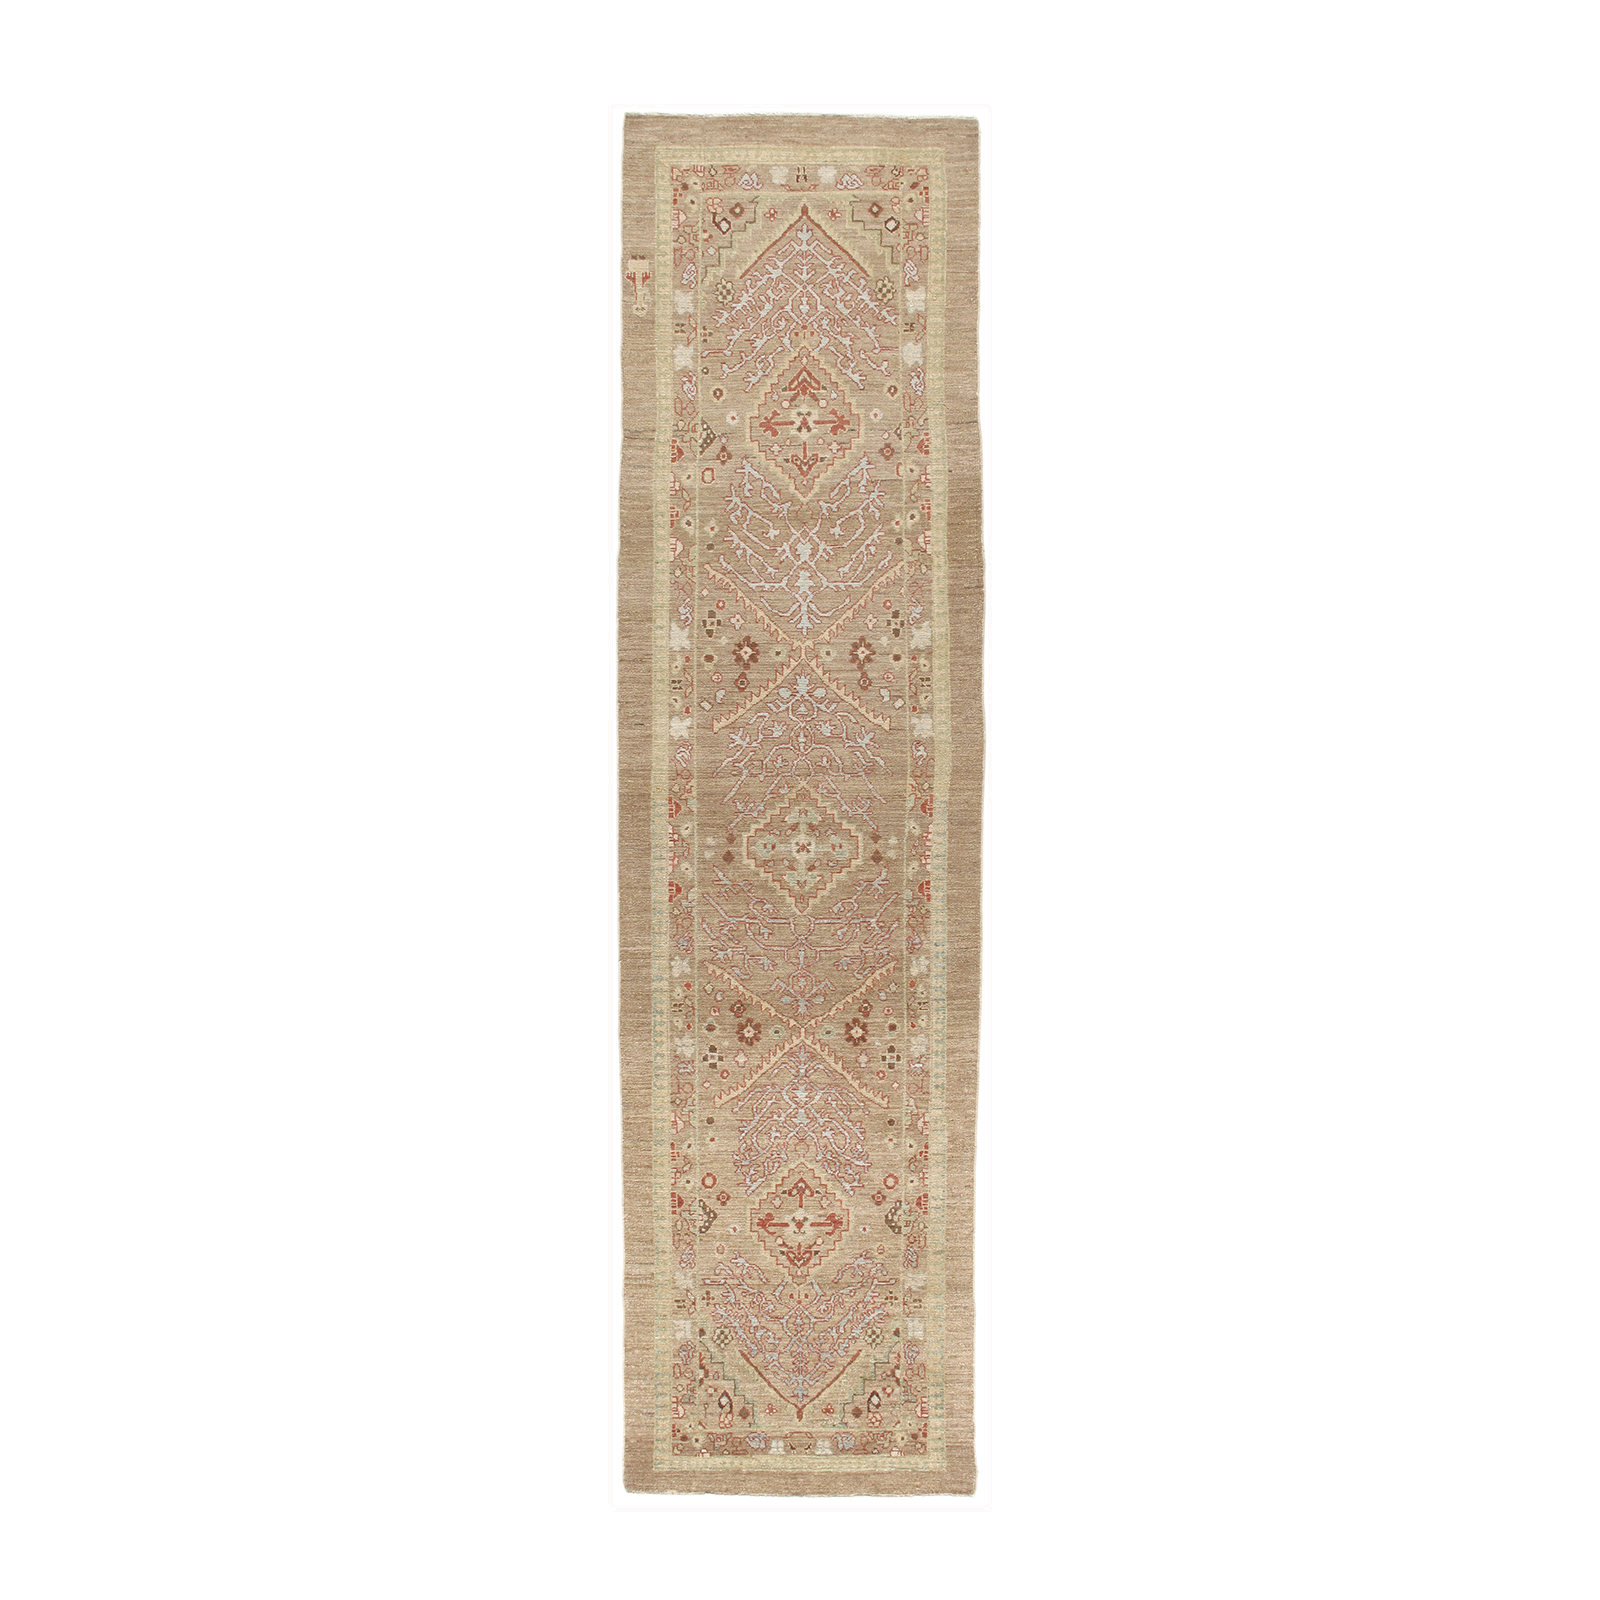 This Persian Kurdish runner is crafted by hand-knotted and made by hand-spun wool .